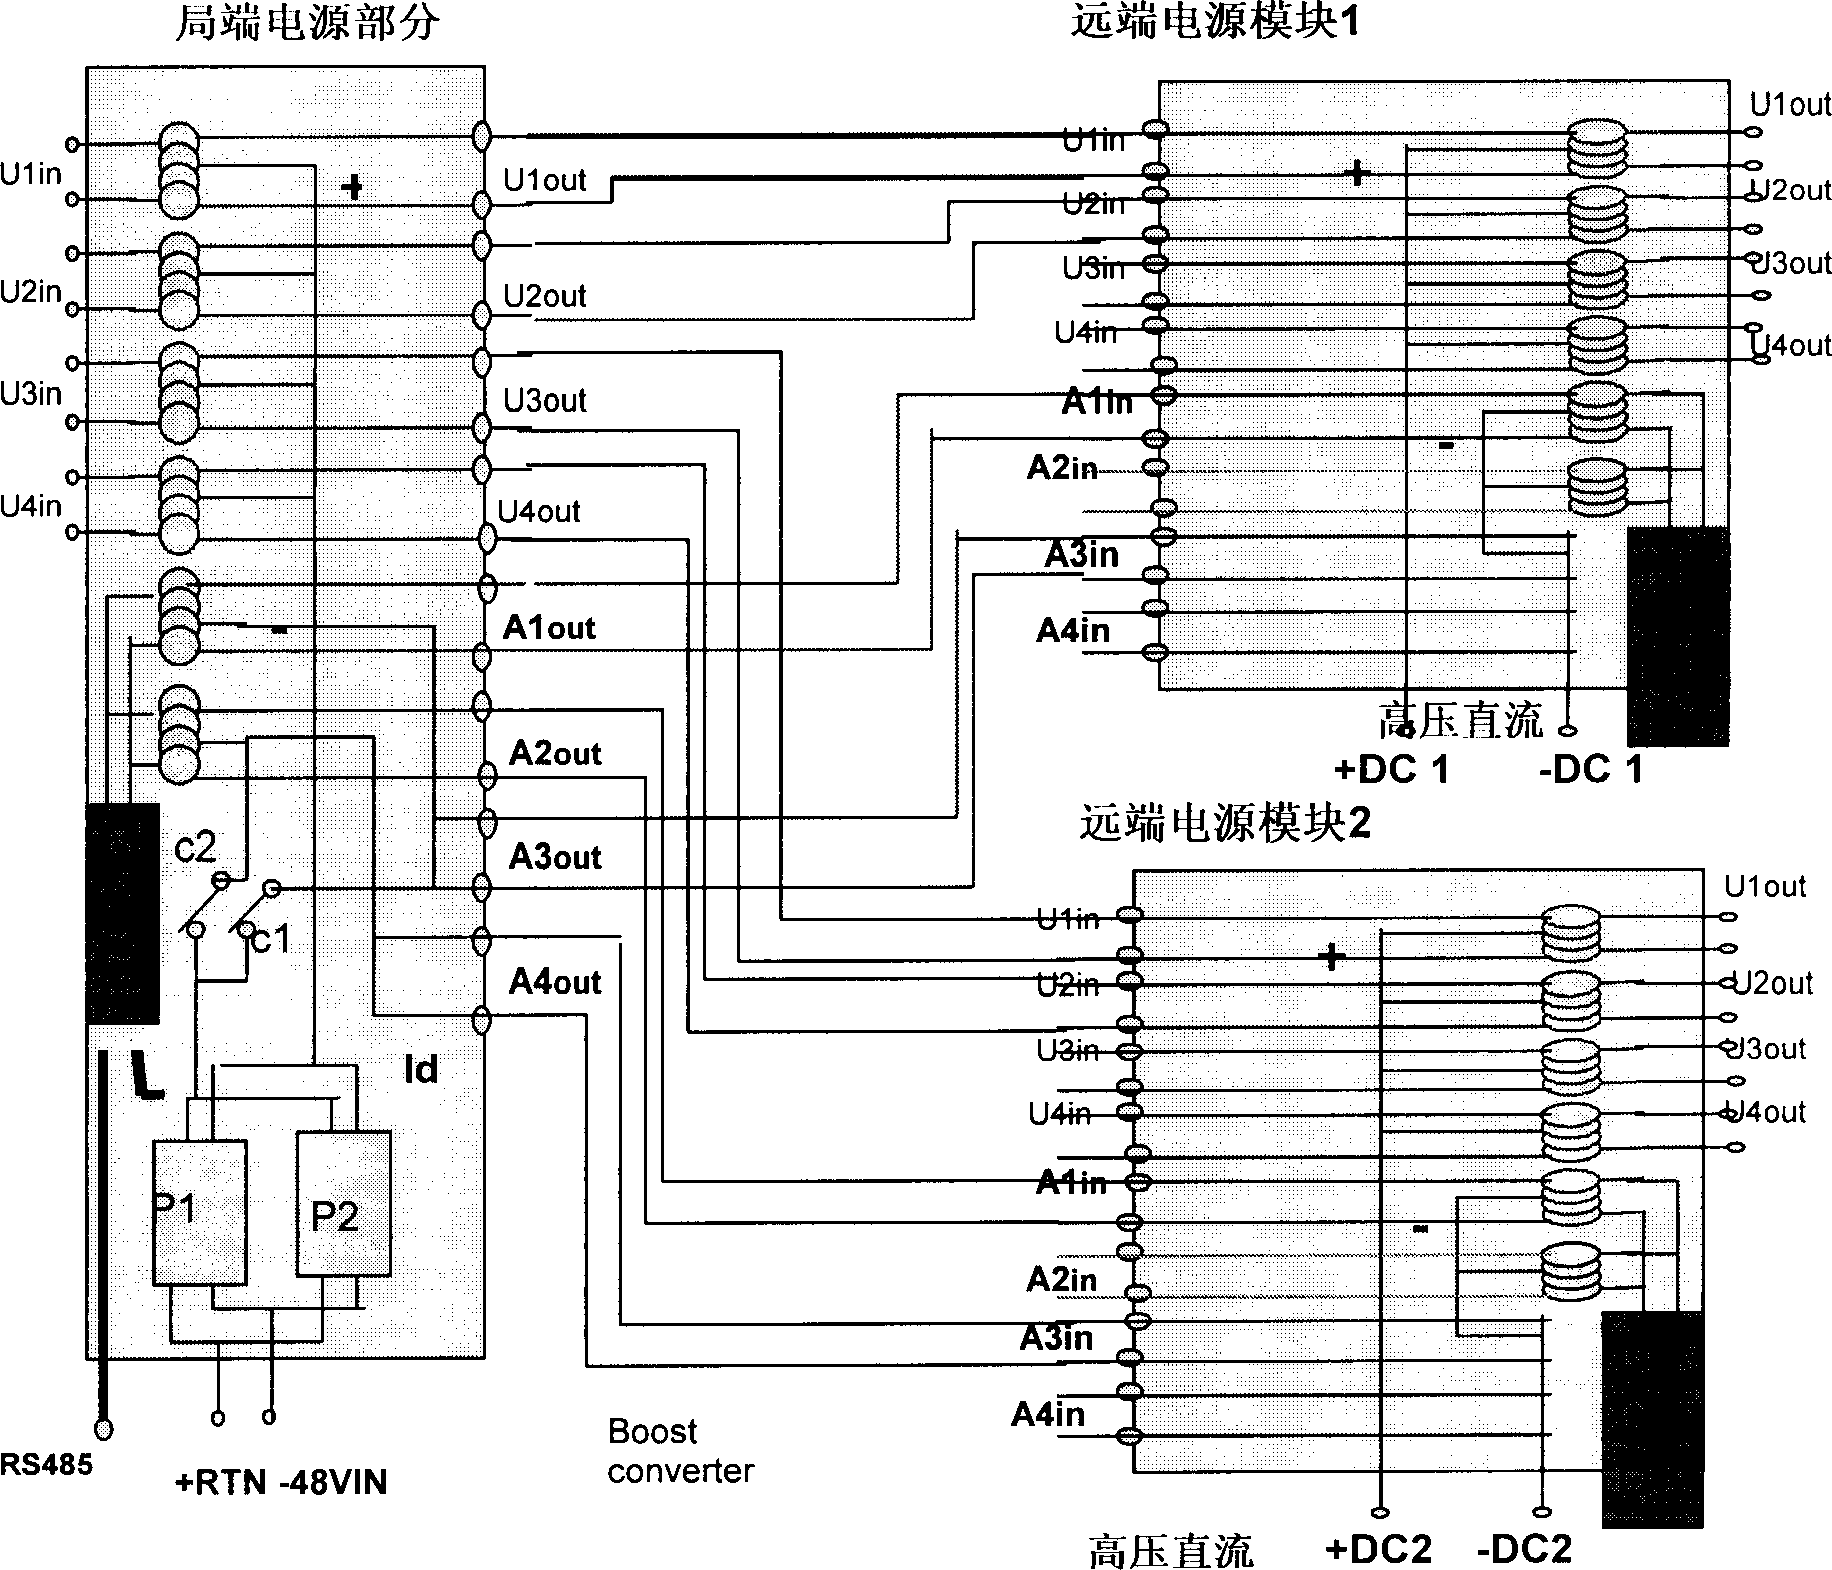 Remote power supply system in communication system